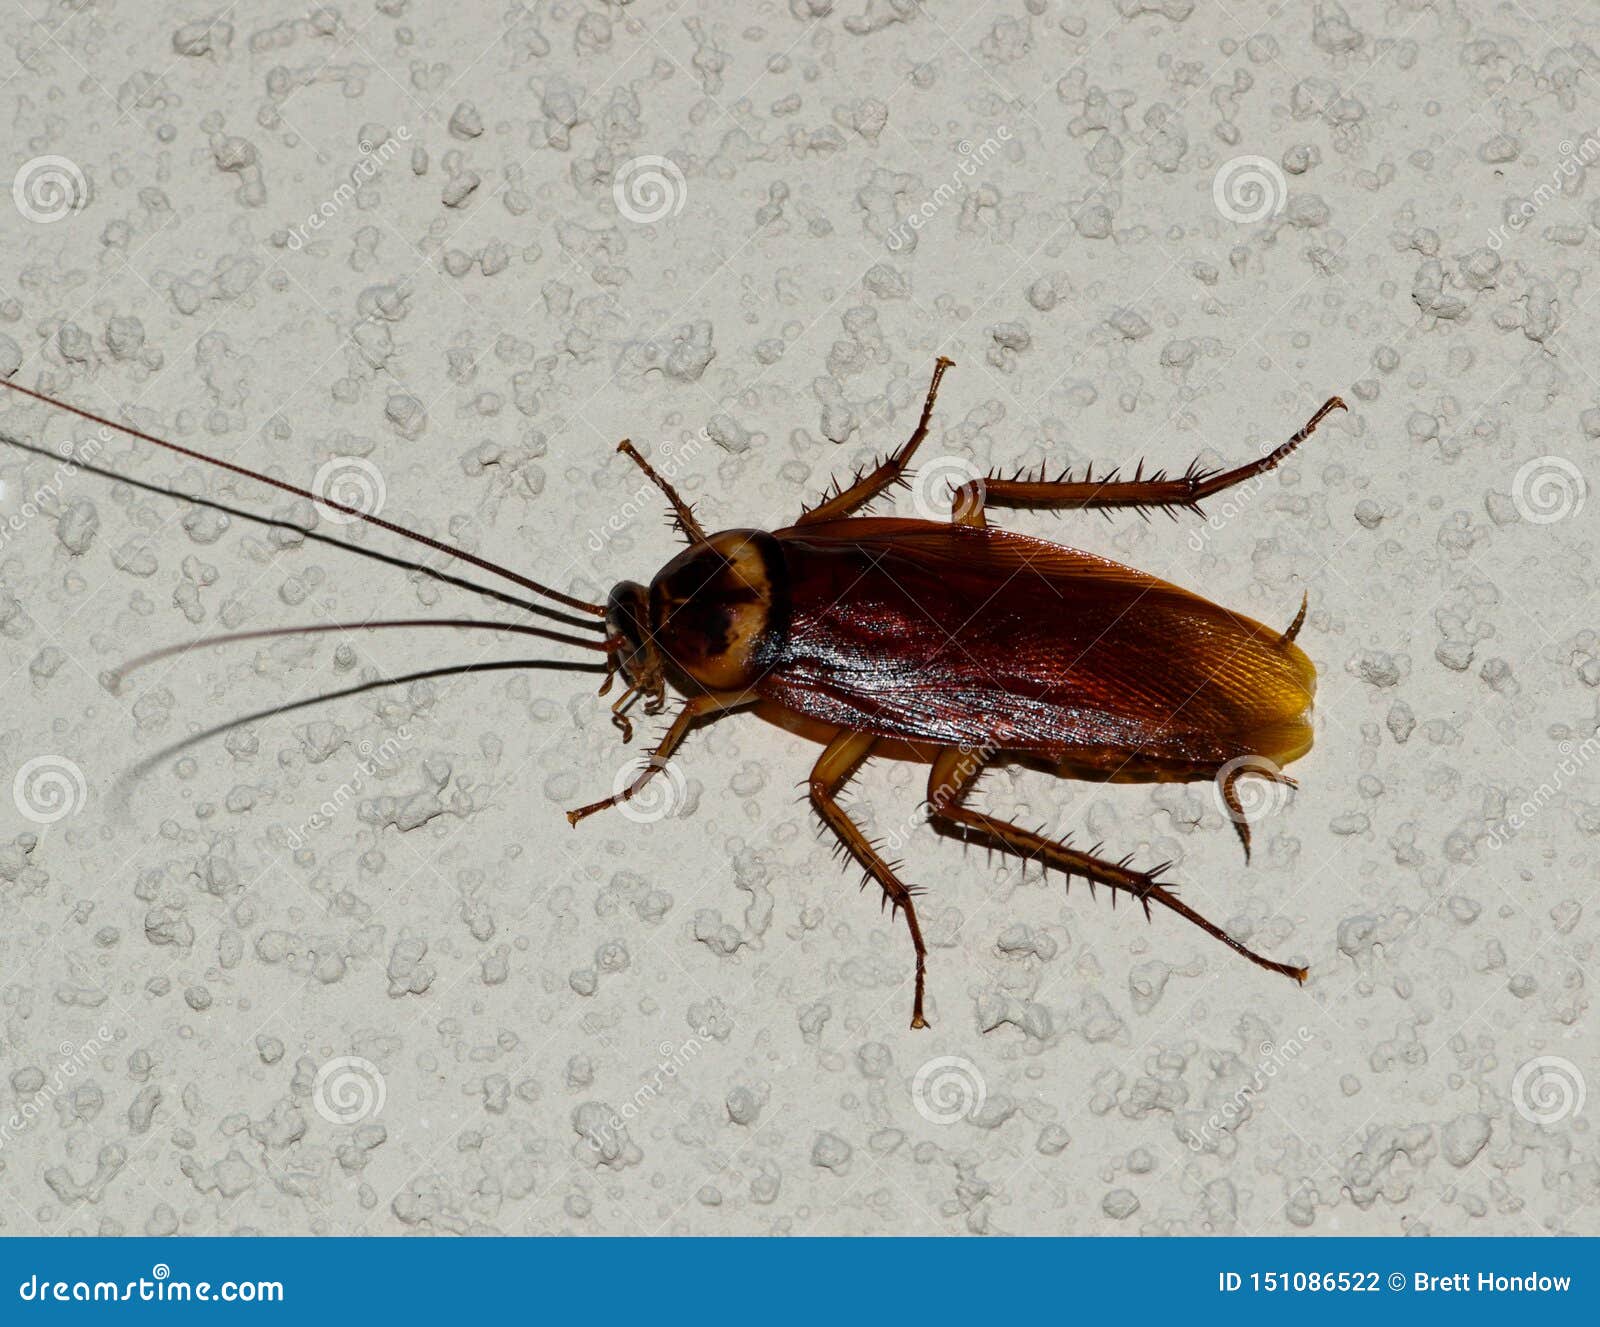 American Cockroach On A White Textured Wall Stock Photo Image Of Insect Cockroach